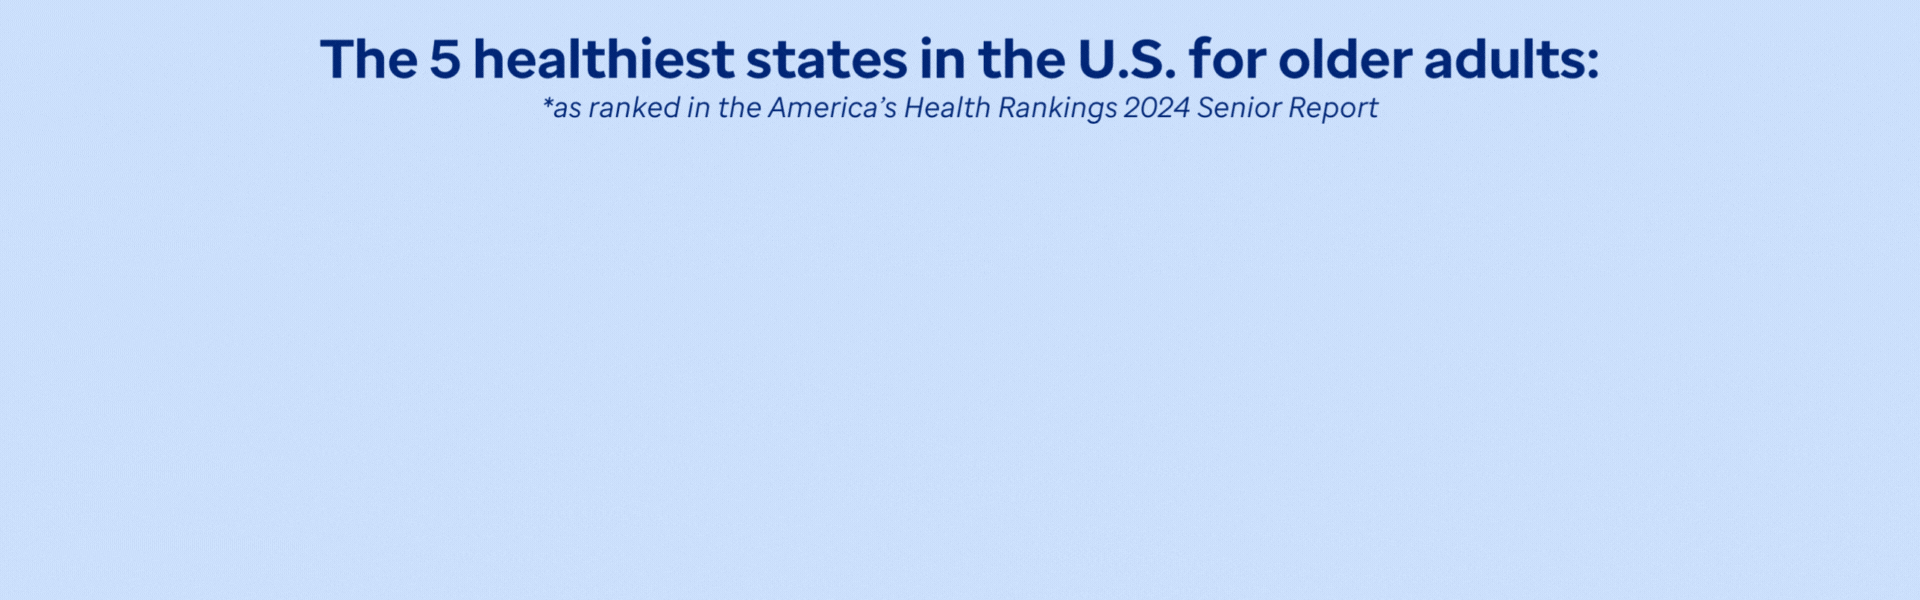 The top 5 healthiest states for older adults to live in the United States - 5 Minnesota - 4 New Hampshire - 3 Vermont - 2 Colorado - 1 Utah